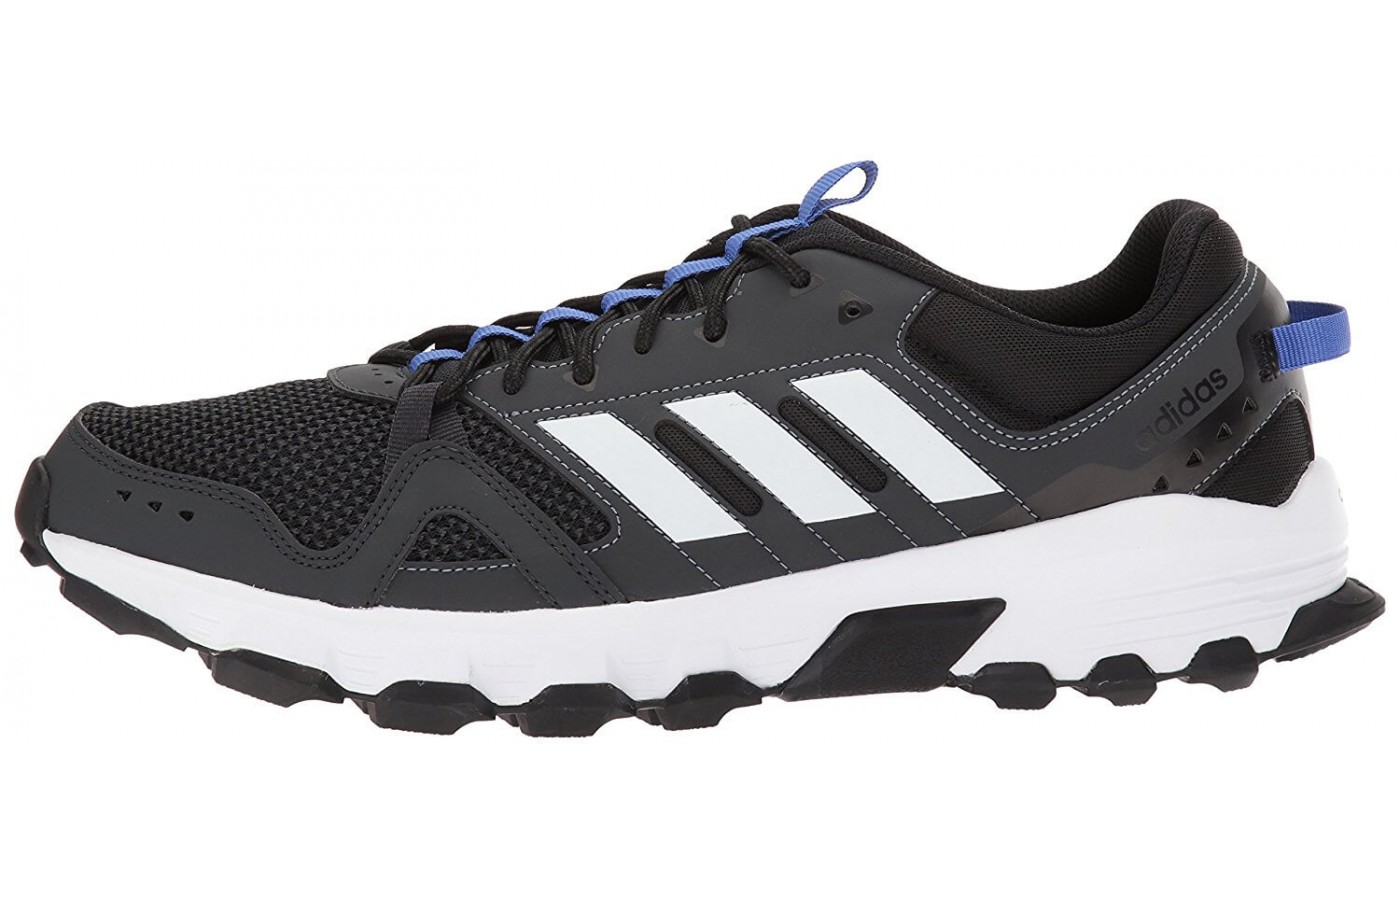 the adidas rockadia trail runner features great comfort